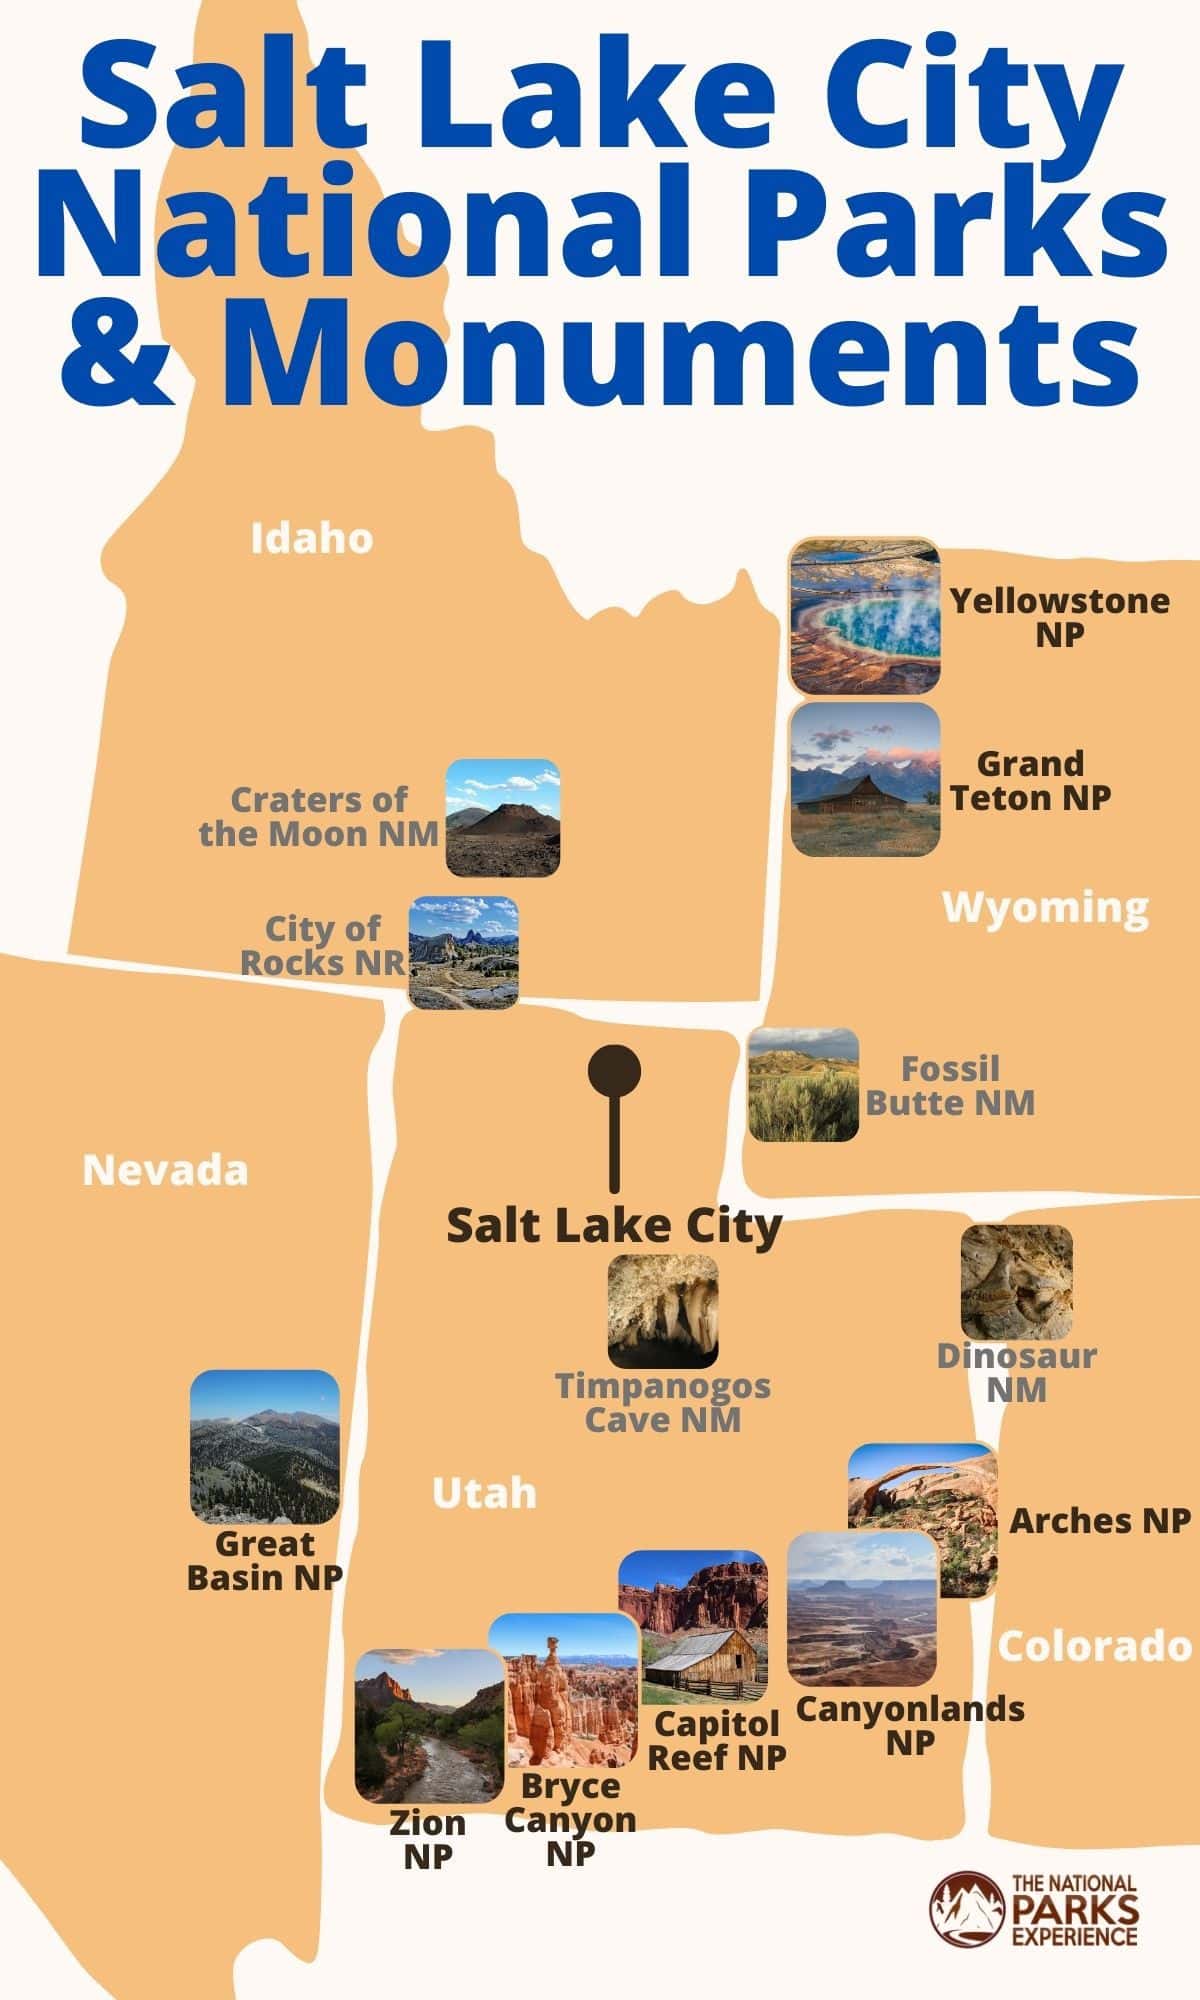 Salt Lake City National Parks and Monuments Map